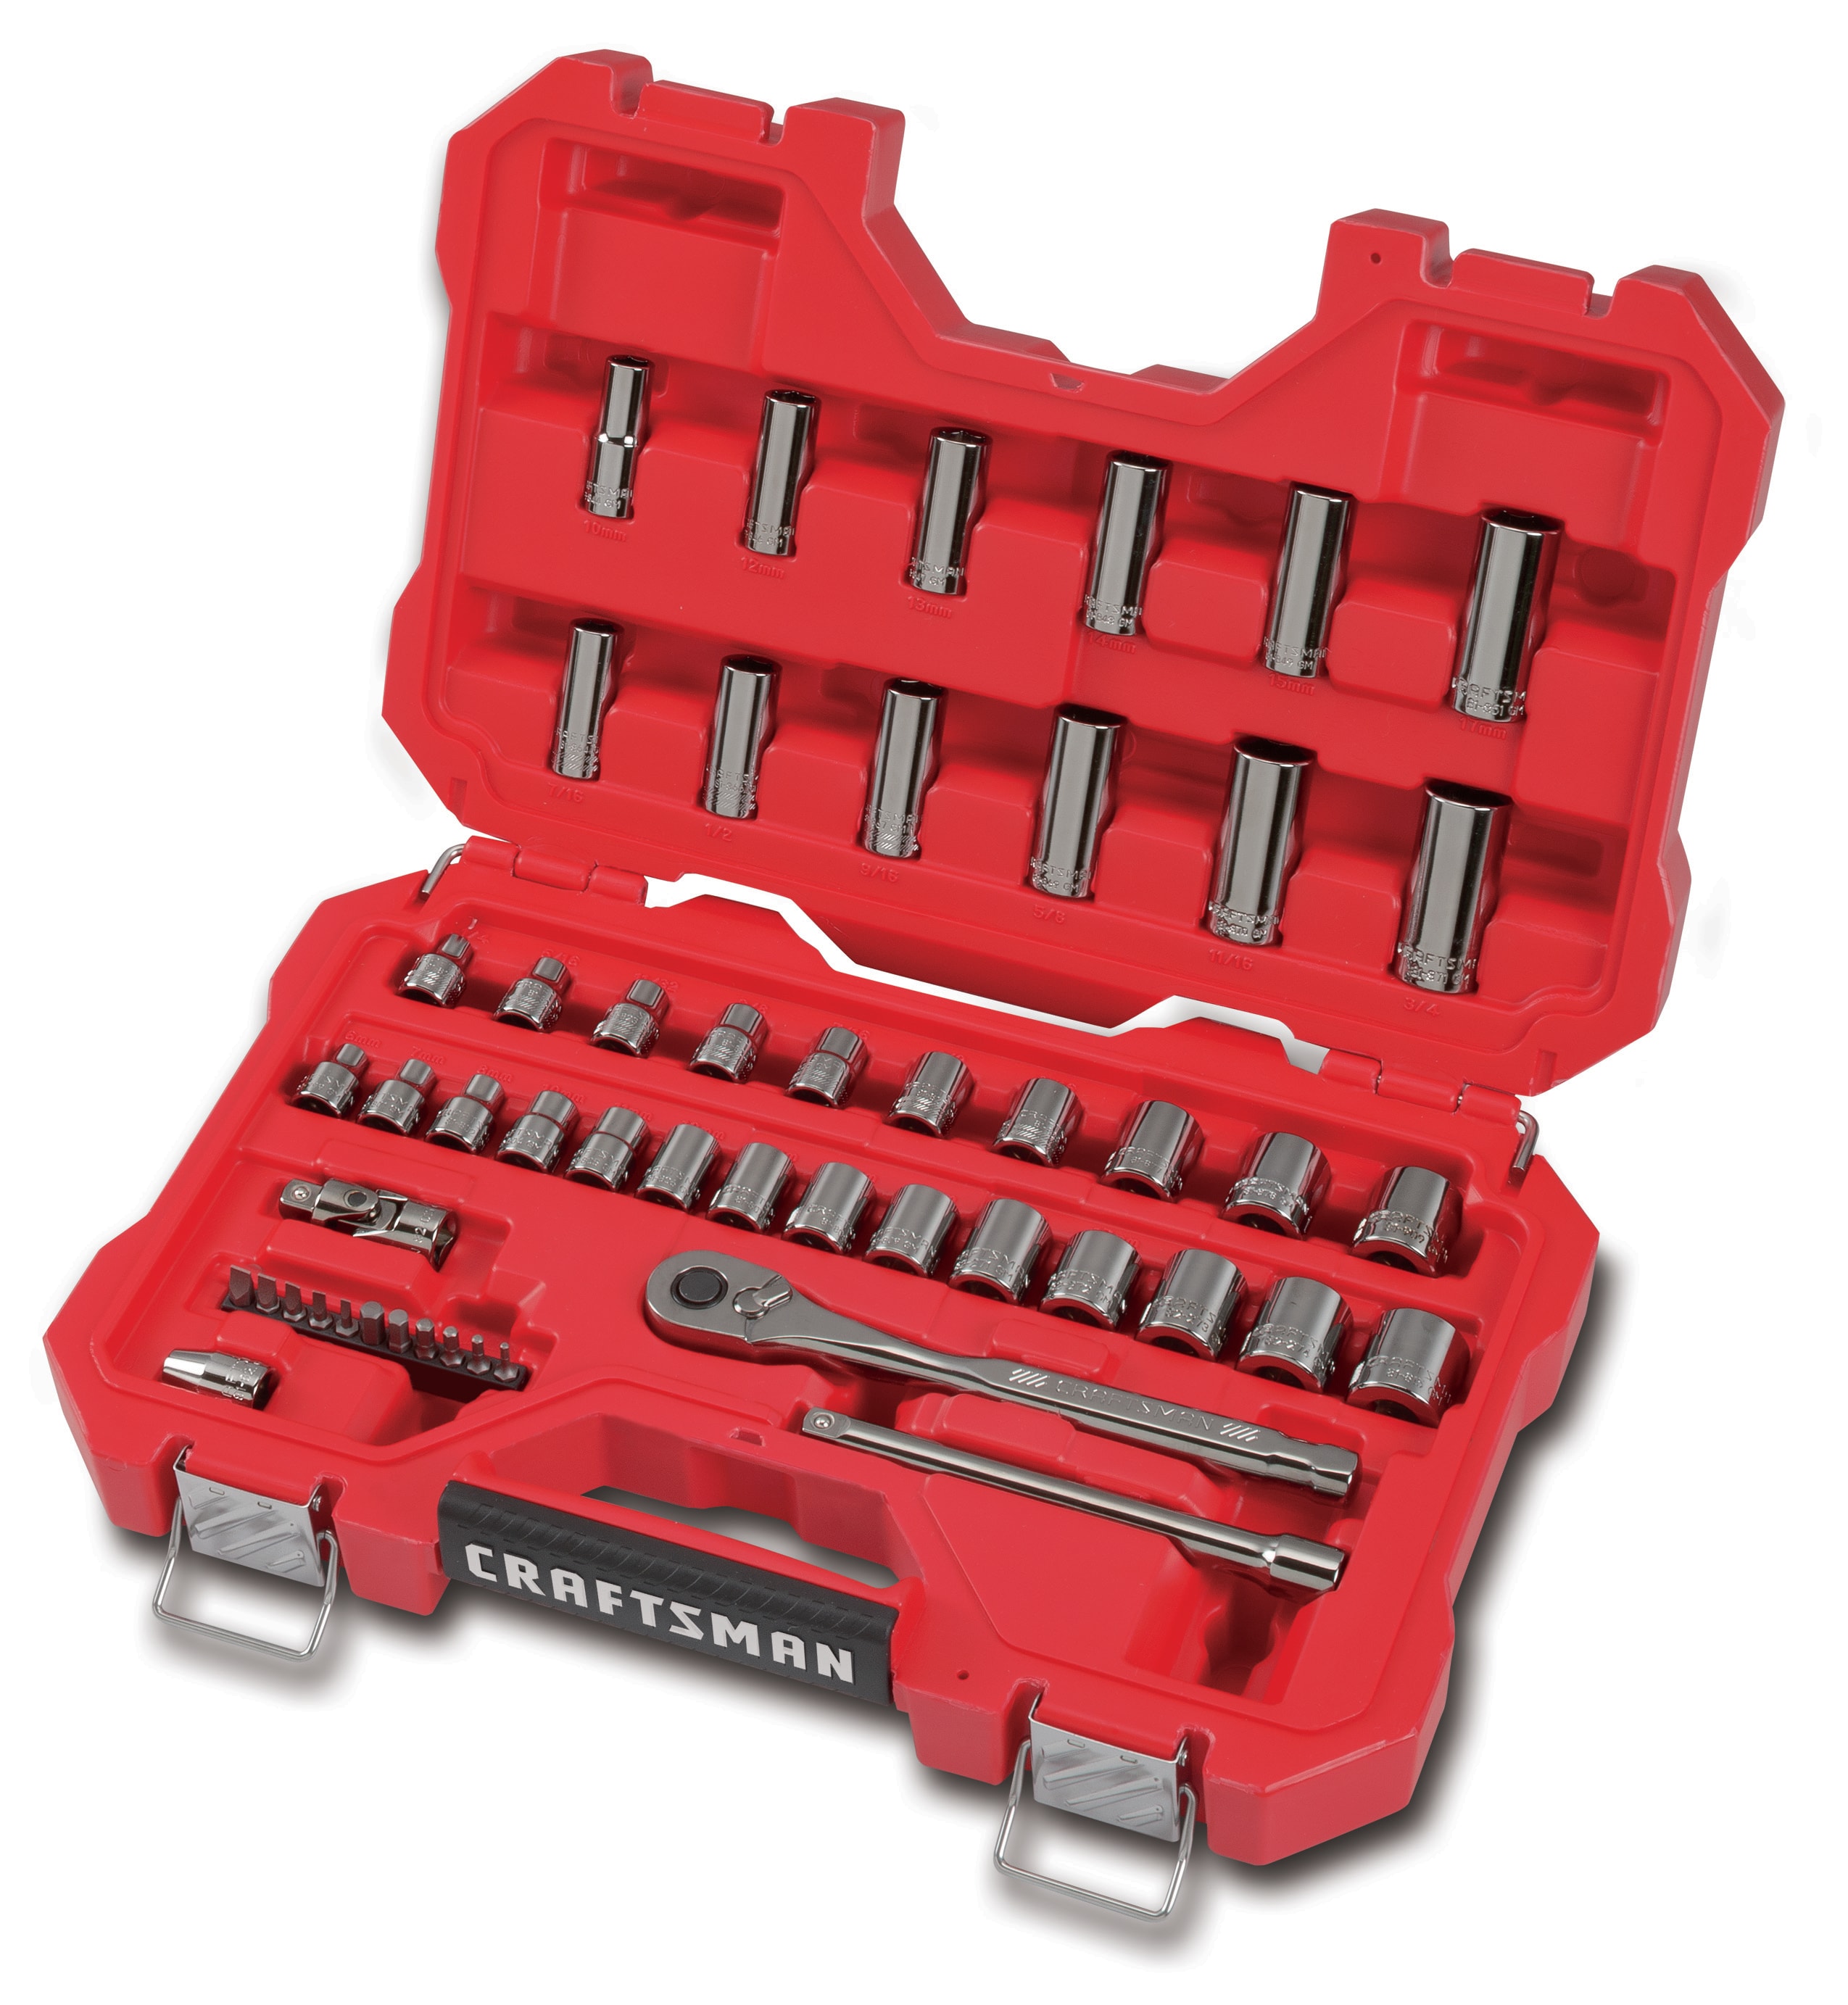 40 Piece 3/8"" And 1/4"" Drive Socket Set Tool Kit Ratchet Wrench Extension